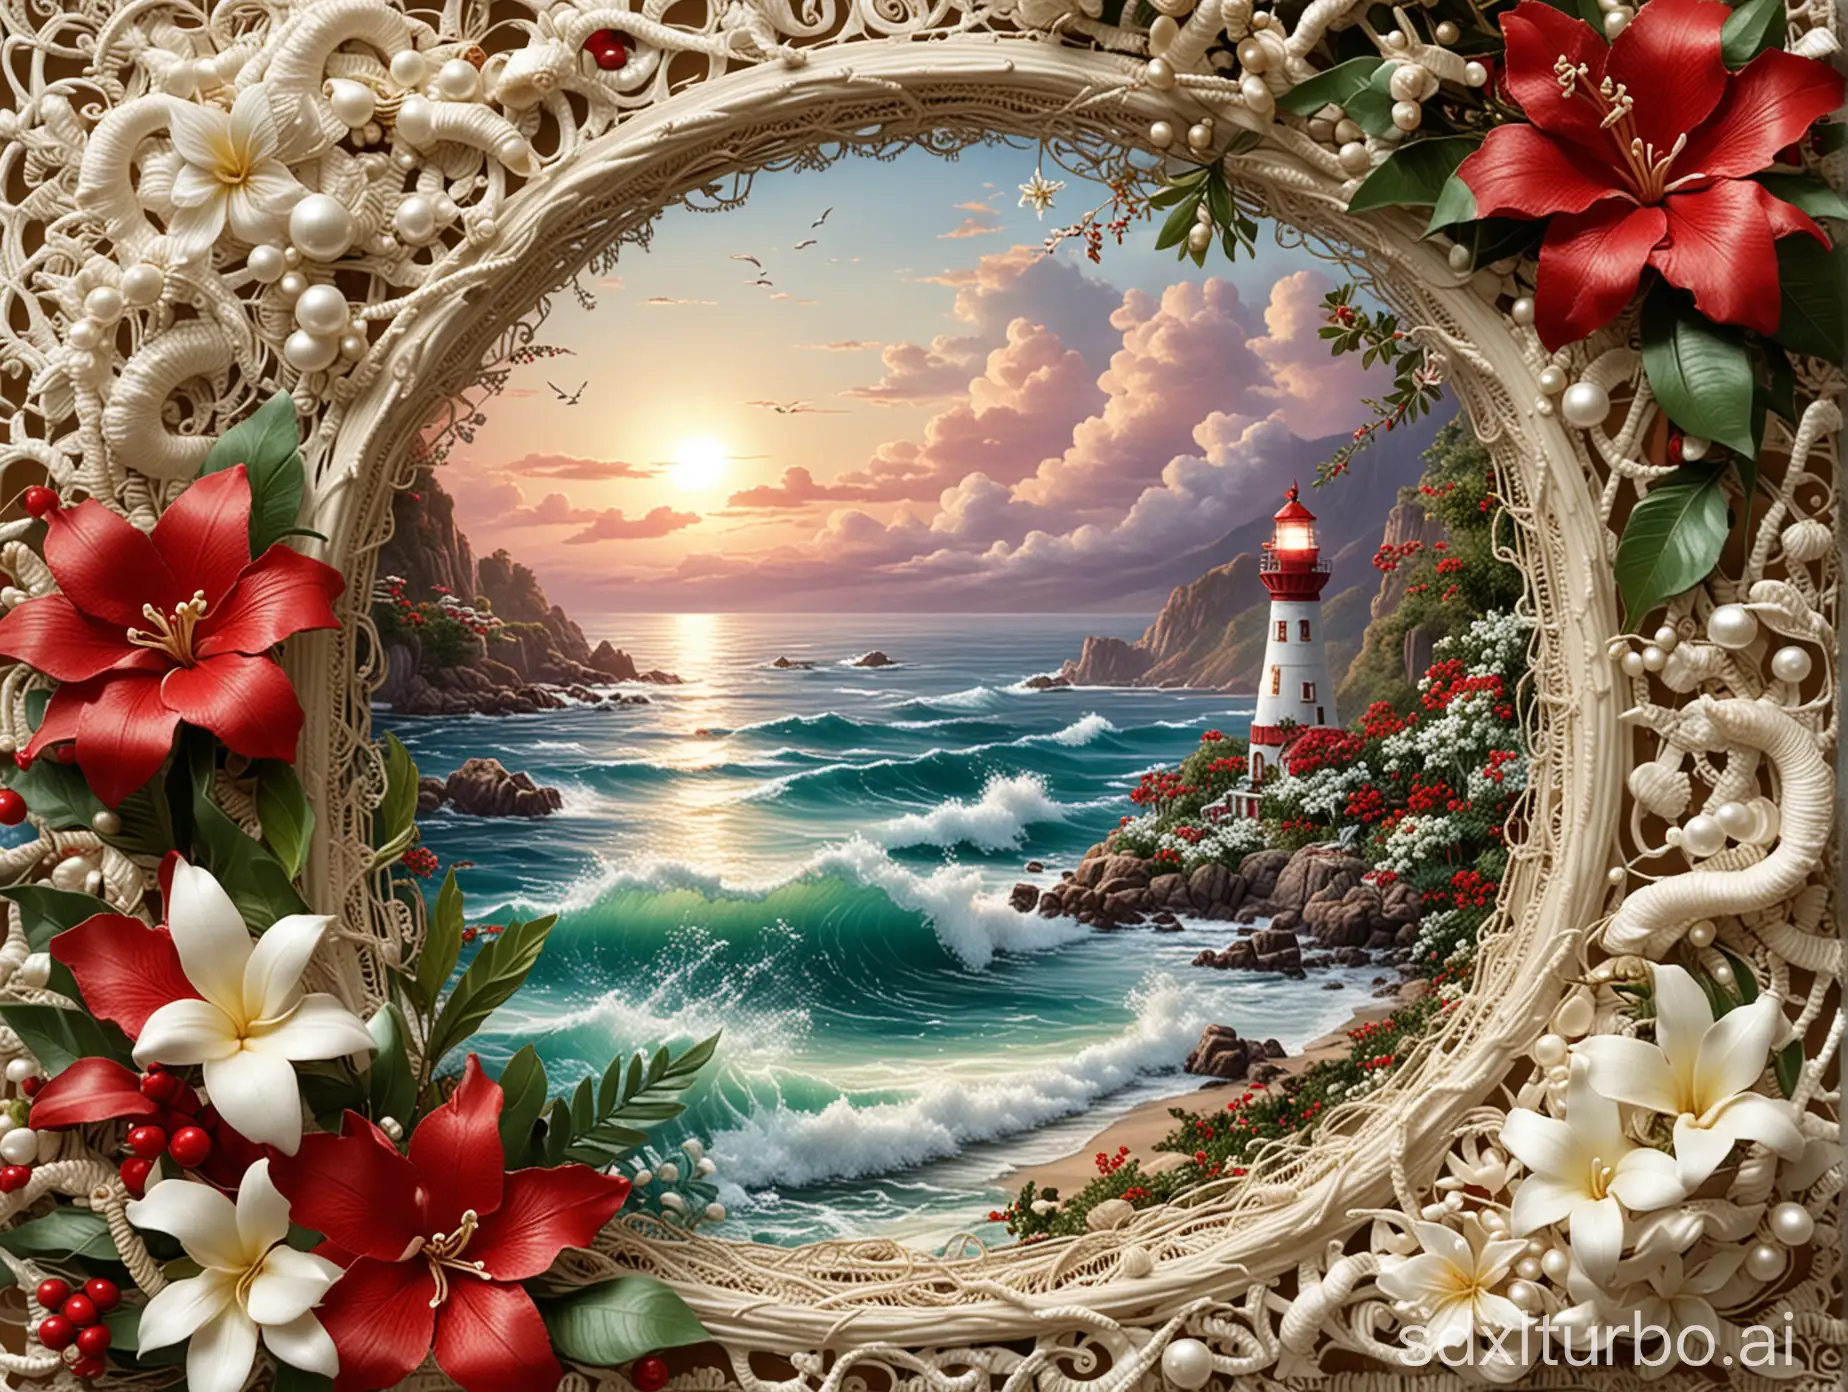 exquisite vintage scrapbook, white lace filigram page, inside a frame a wonderful beautiful red and white spiral lighthouse, surrealist, lovely lush island, lit top, wavy ocean,  ethereal fantasy concept by thomas kinkade , on frame marine motifs 3D, ropes 3D, plumerias flowers 3D lace filigram 3D and 3D sakuras, leaves, plumerias flowers, holly berries 3D,  ropes and sea shells, pearls : not cropped off; 24k masterpiece; 3d; not cut off;